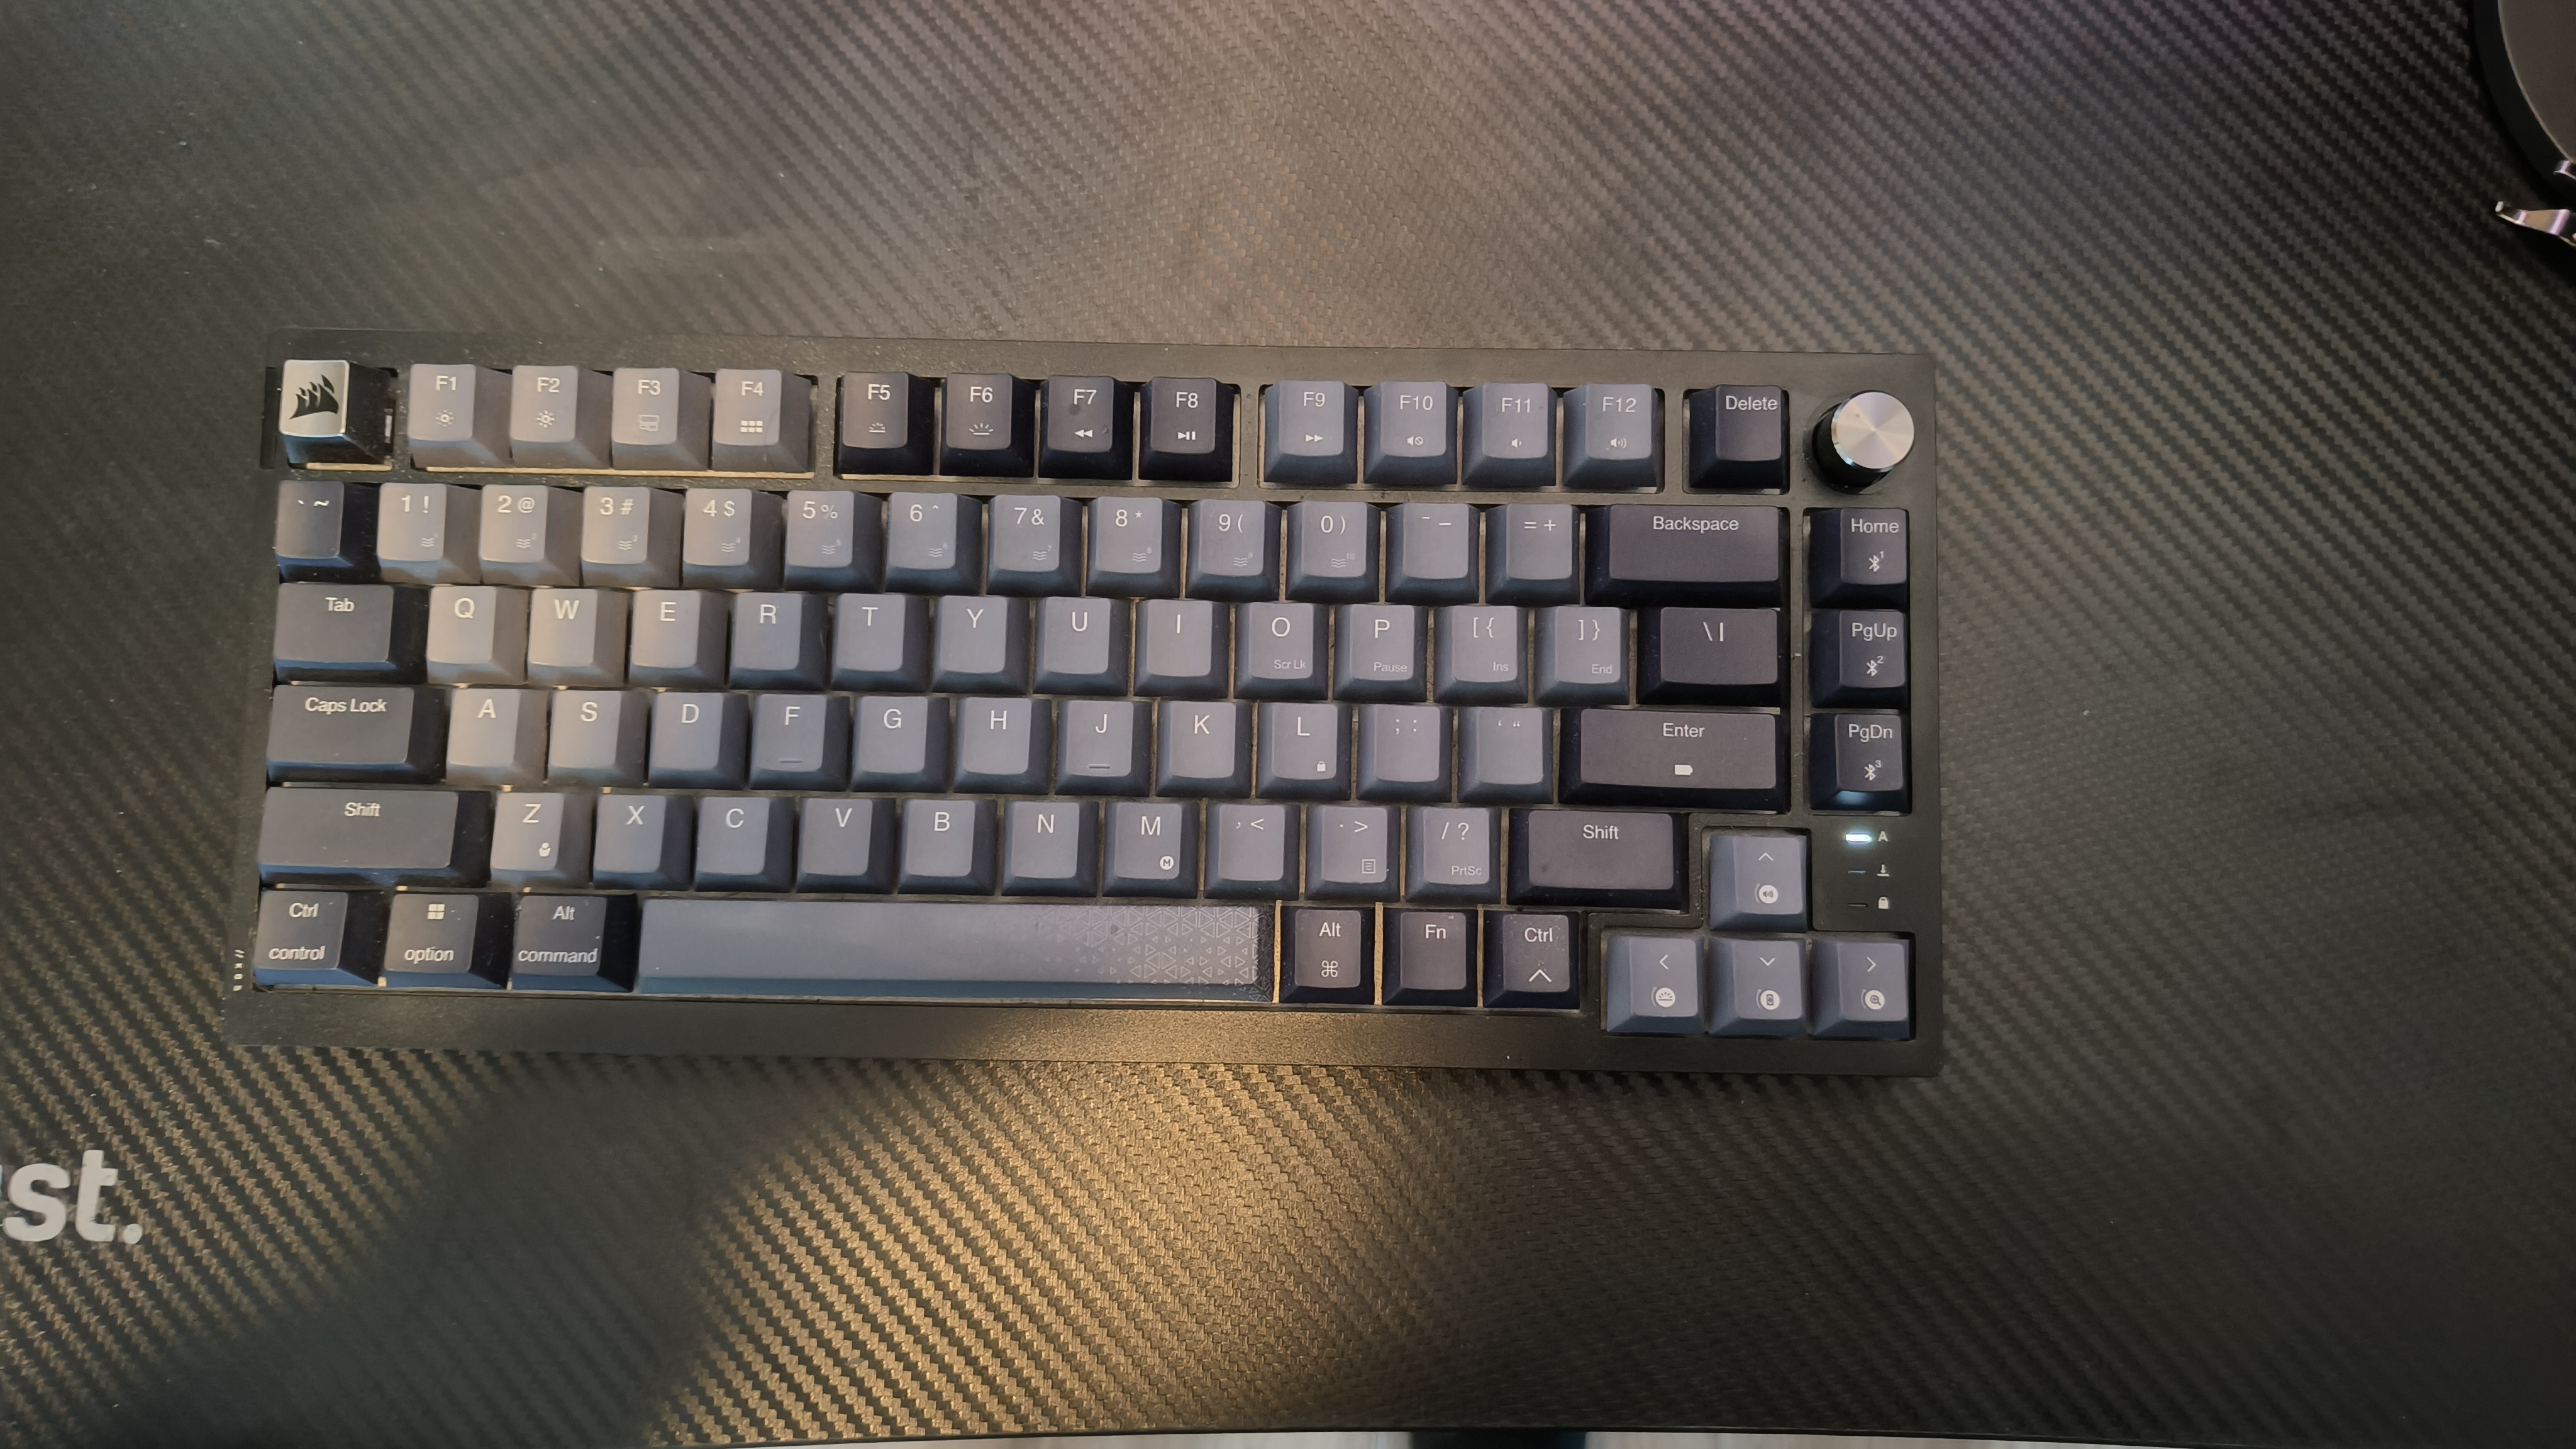 Corsair K65 Plus Wireless Keyboard: a responsive, well-featured gaming keyboard that’s great for typing too